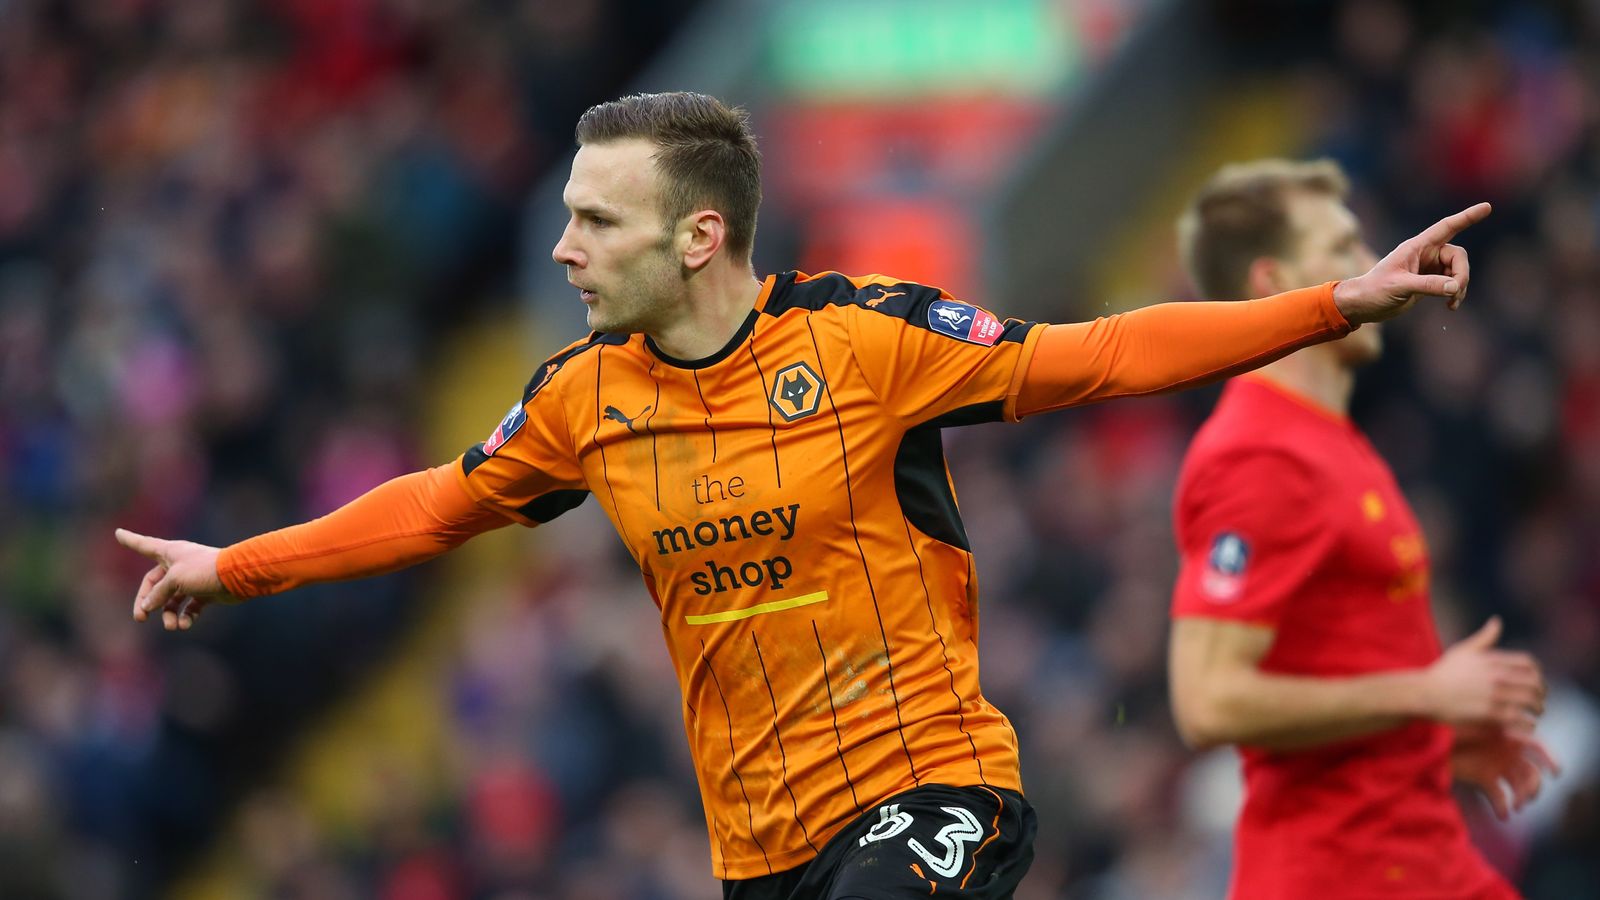 Liverpool 1 - 2 Wolves - Match Report & Highlights